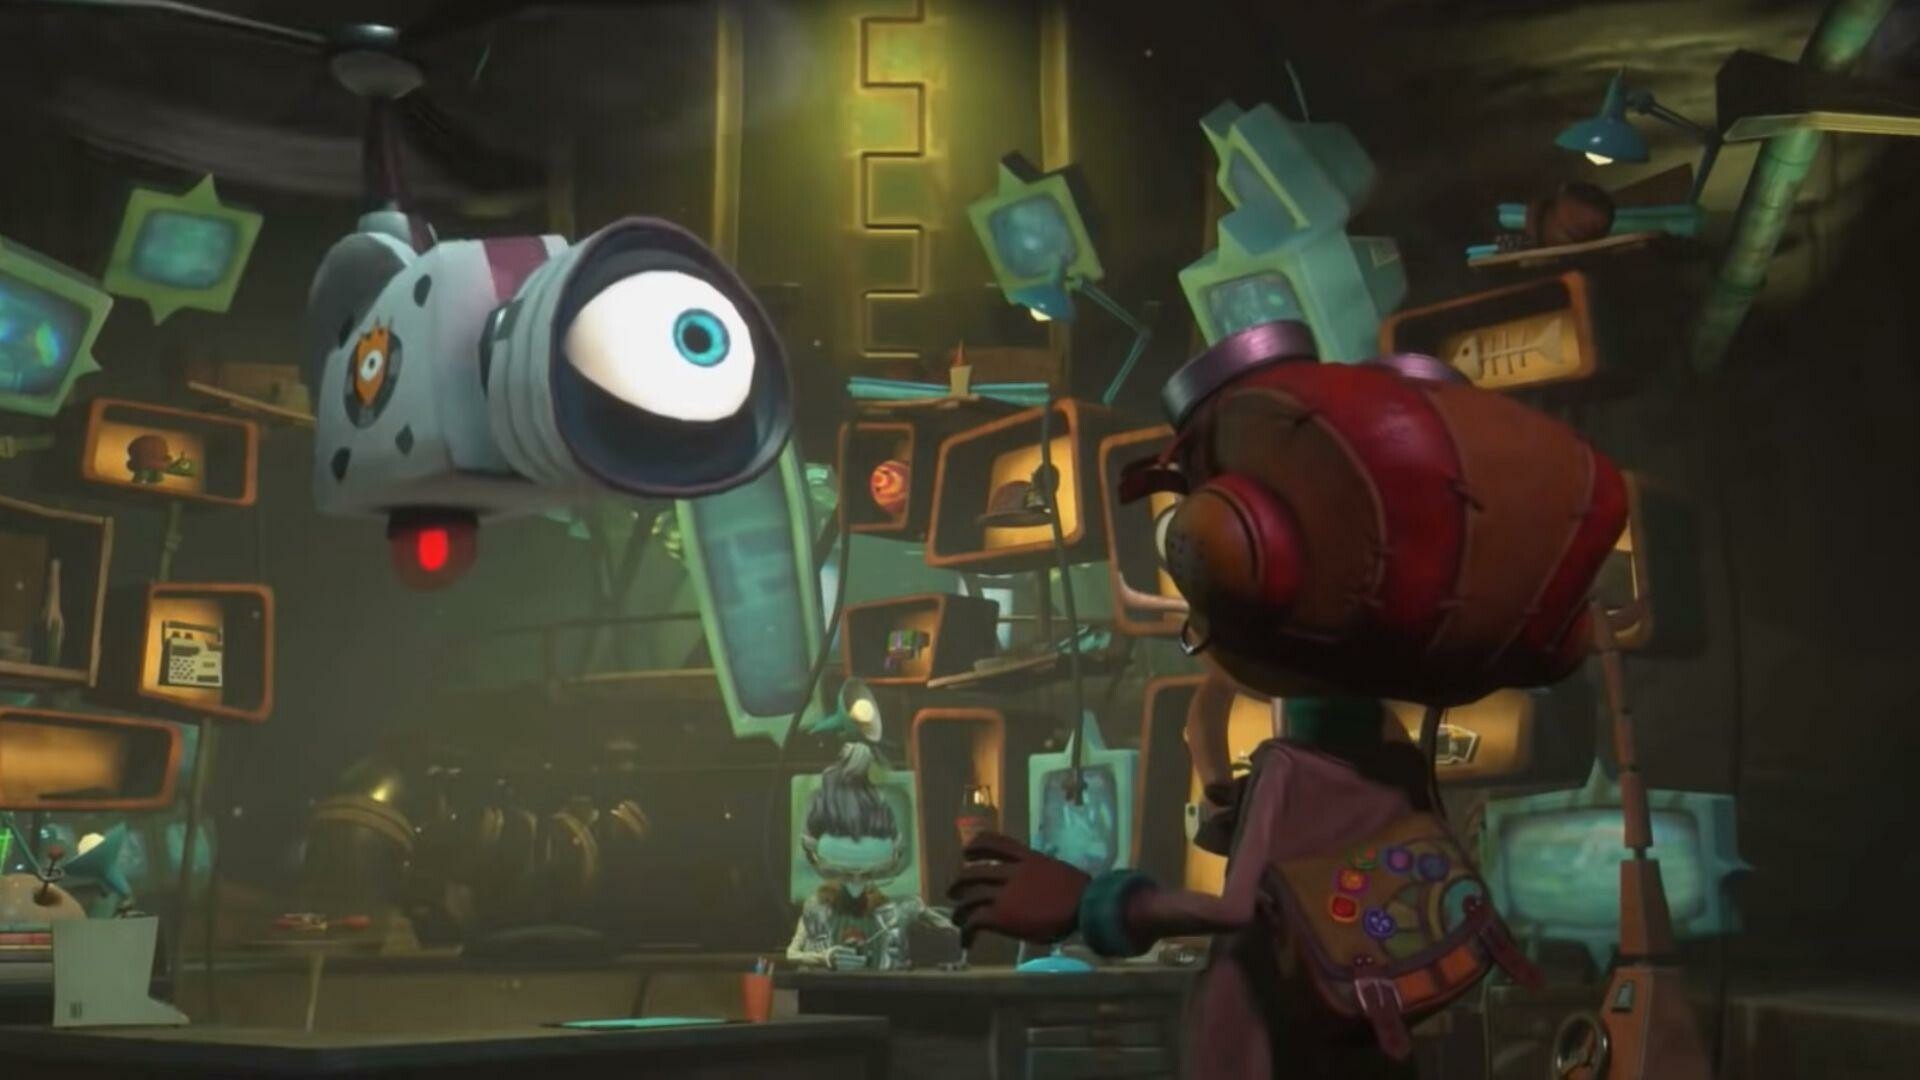 Psychonauts 2: A platform game focused on puzzles and spycraft. 1920x1080 Full HD Background.